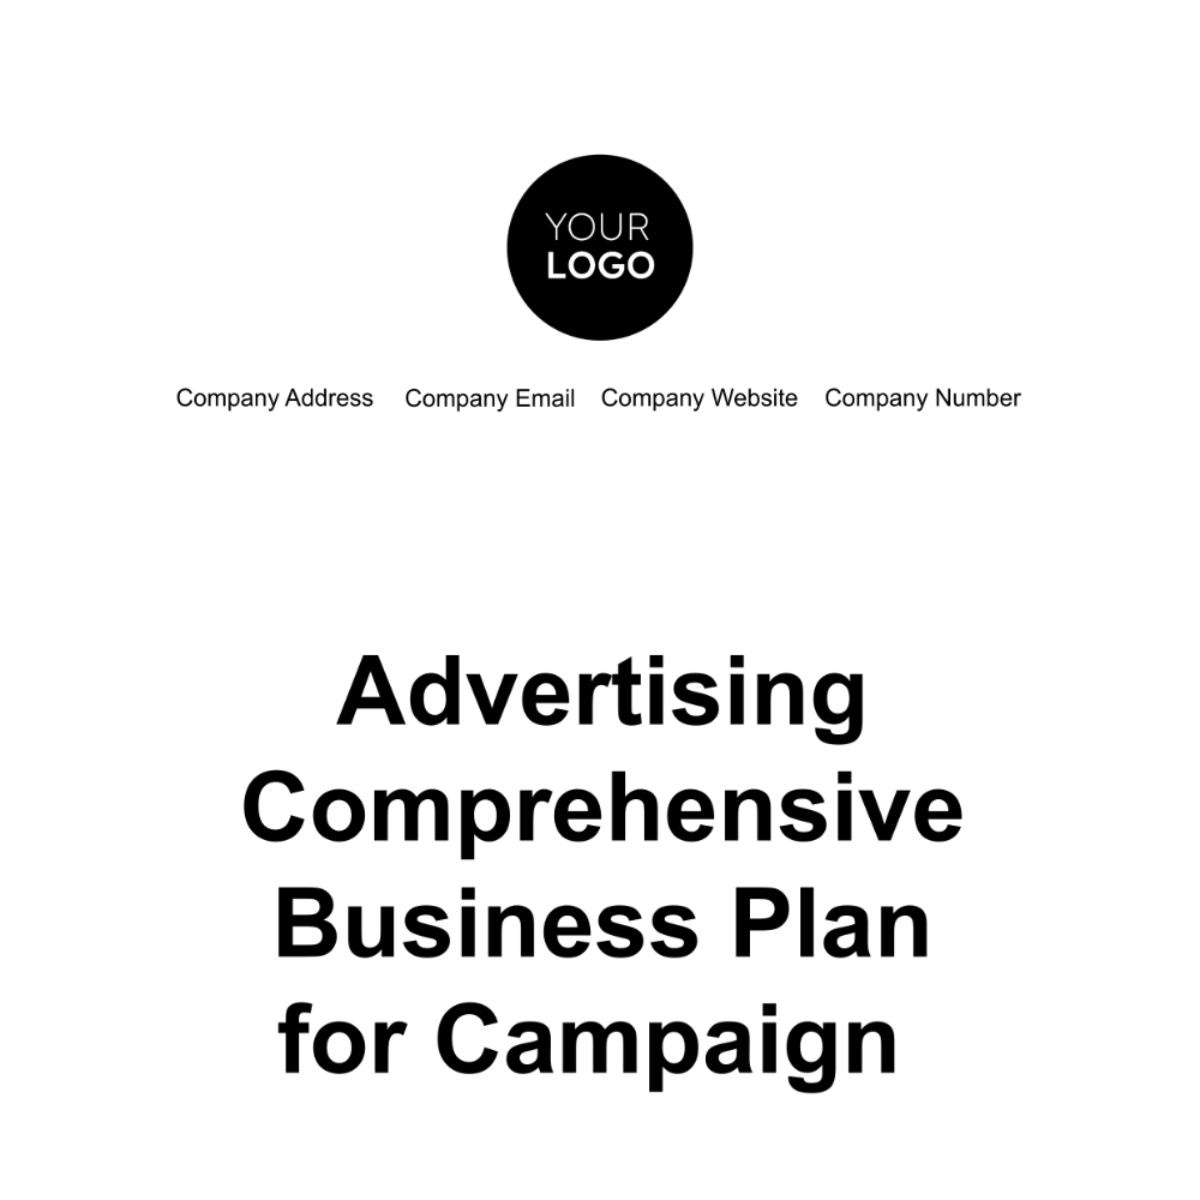 Advertising Comprehensive Business Plan for Campaign  Template